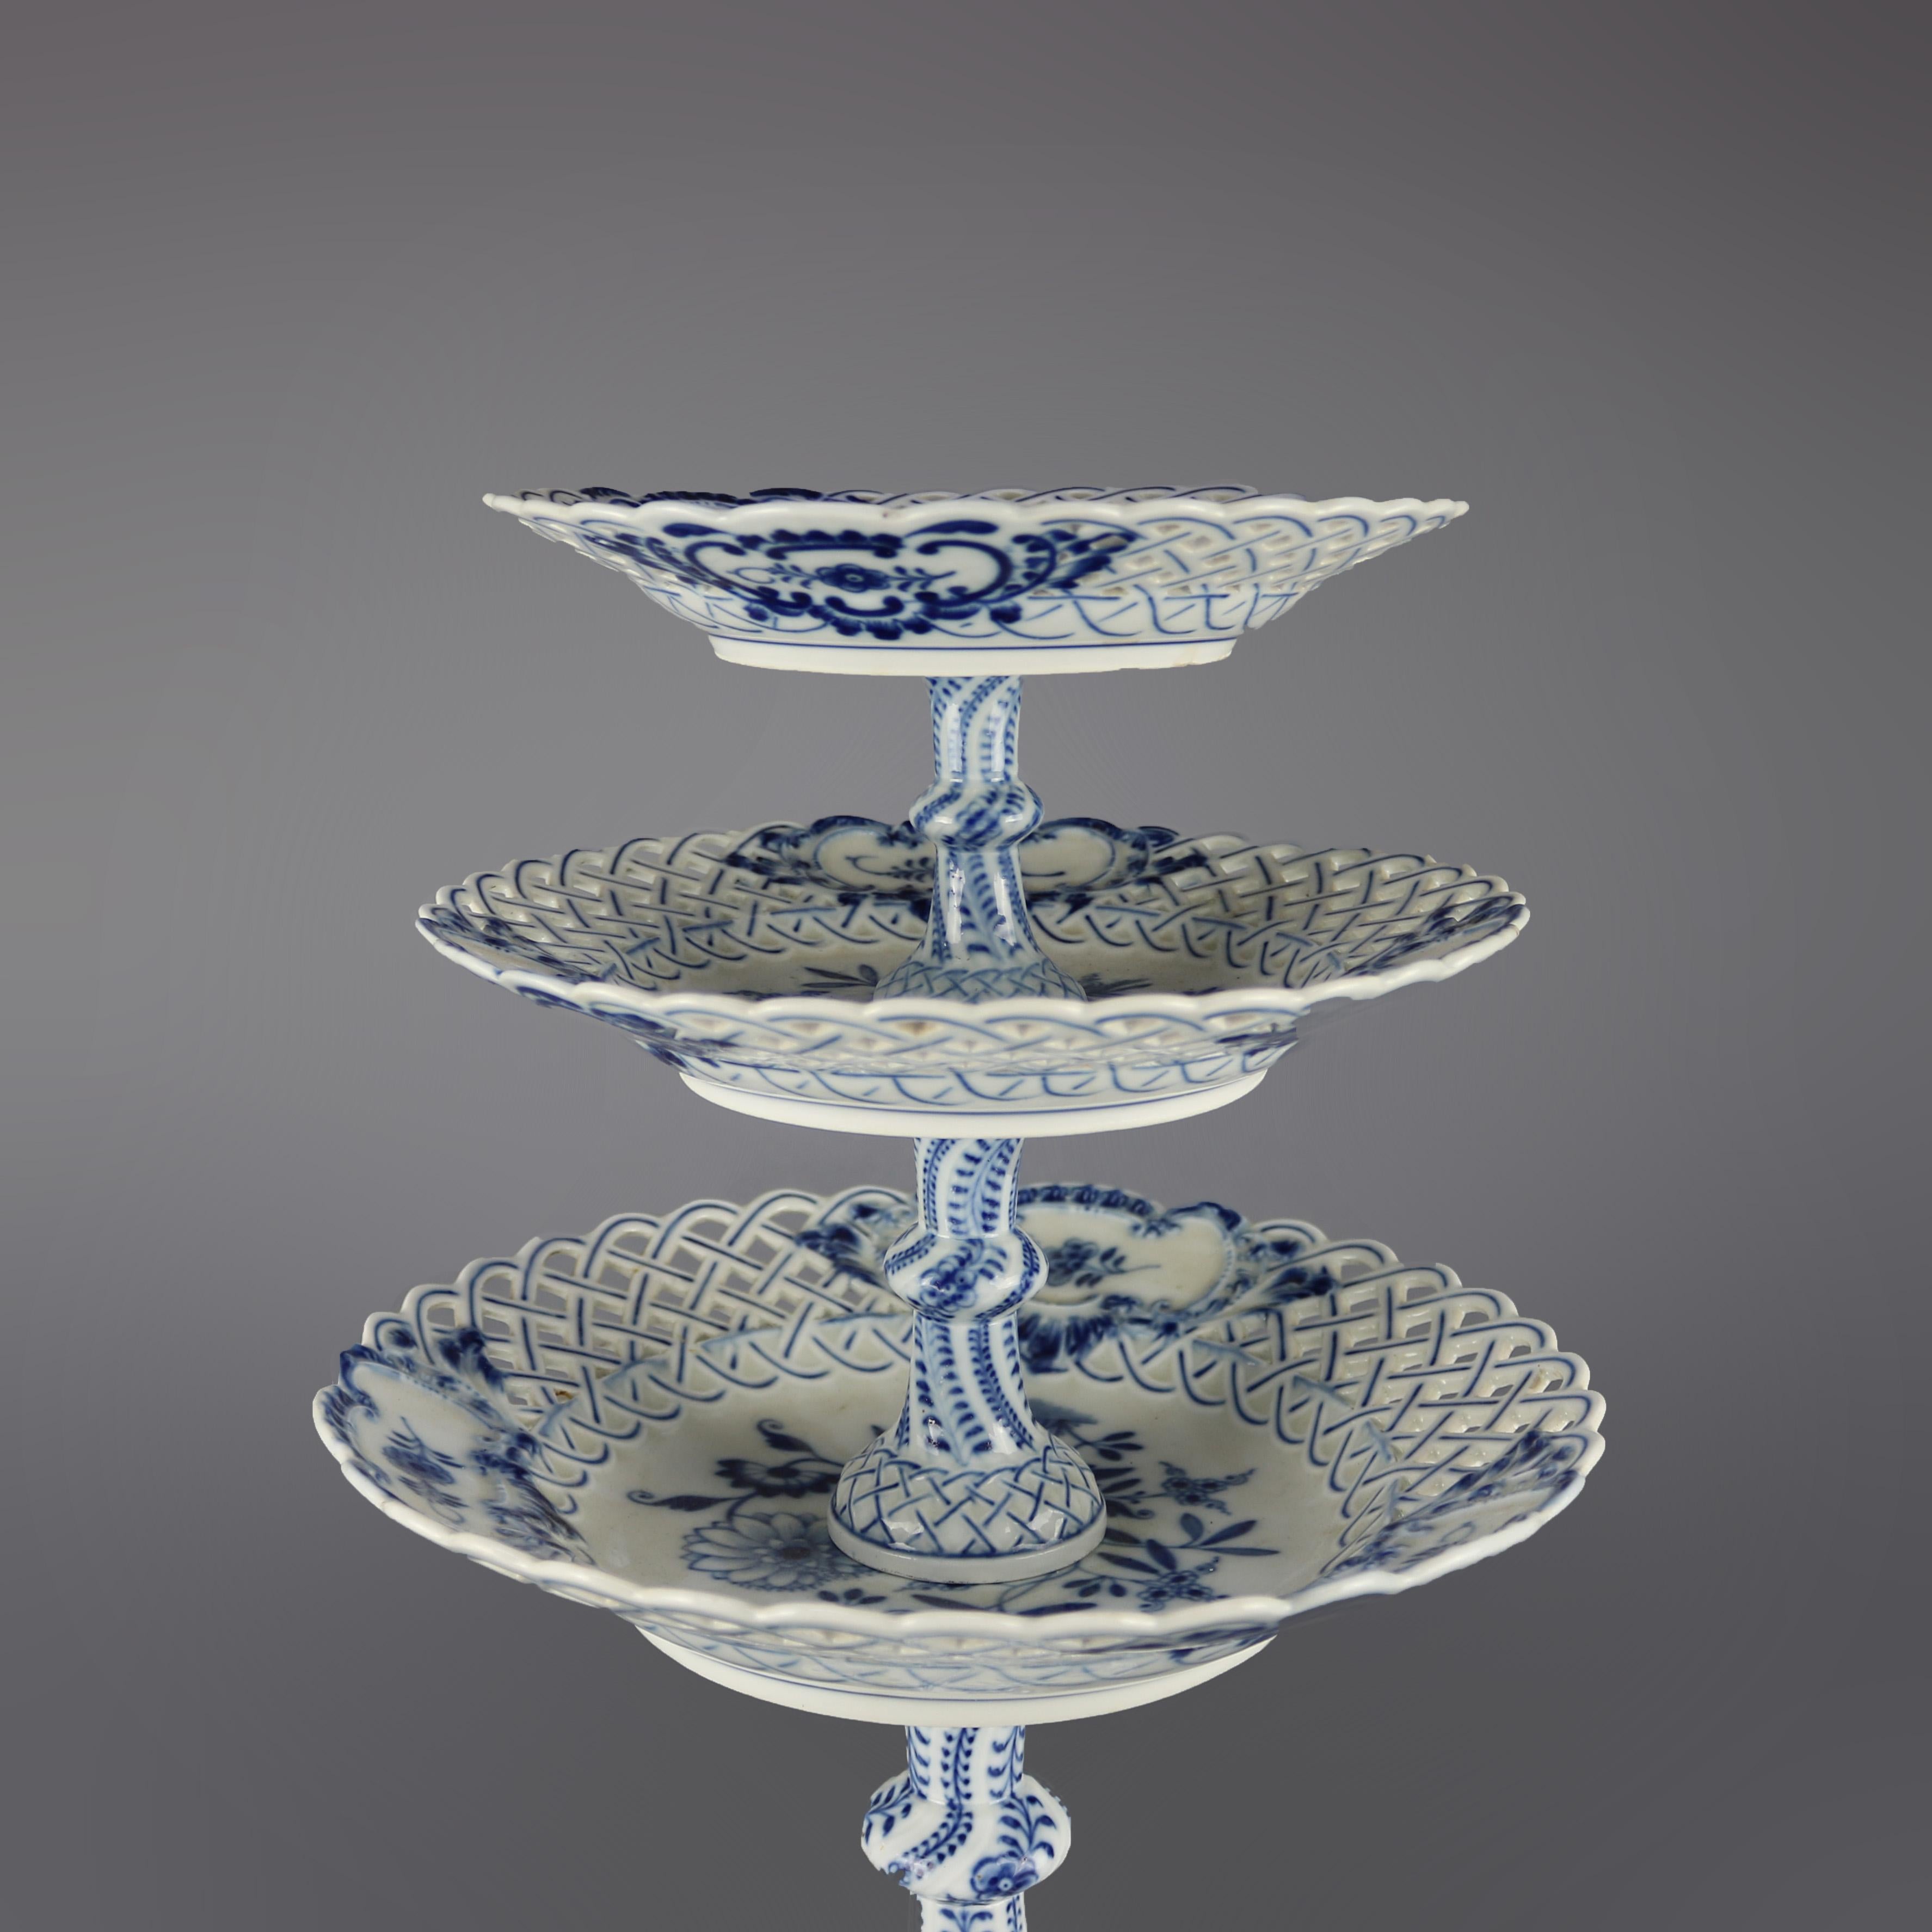 20th Century Antique German Meissen Porcelain Reticulated and Tiered Serving Tray, circa 1900